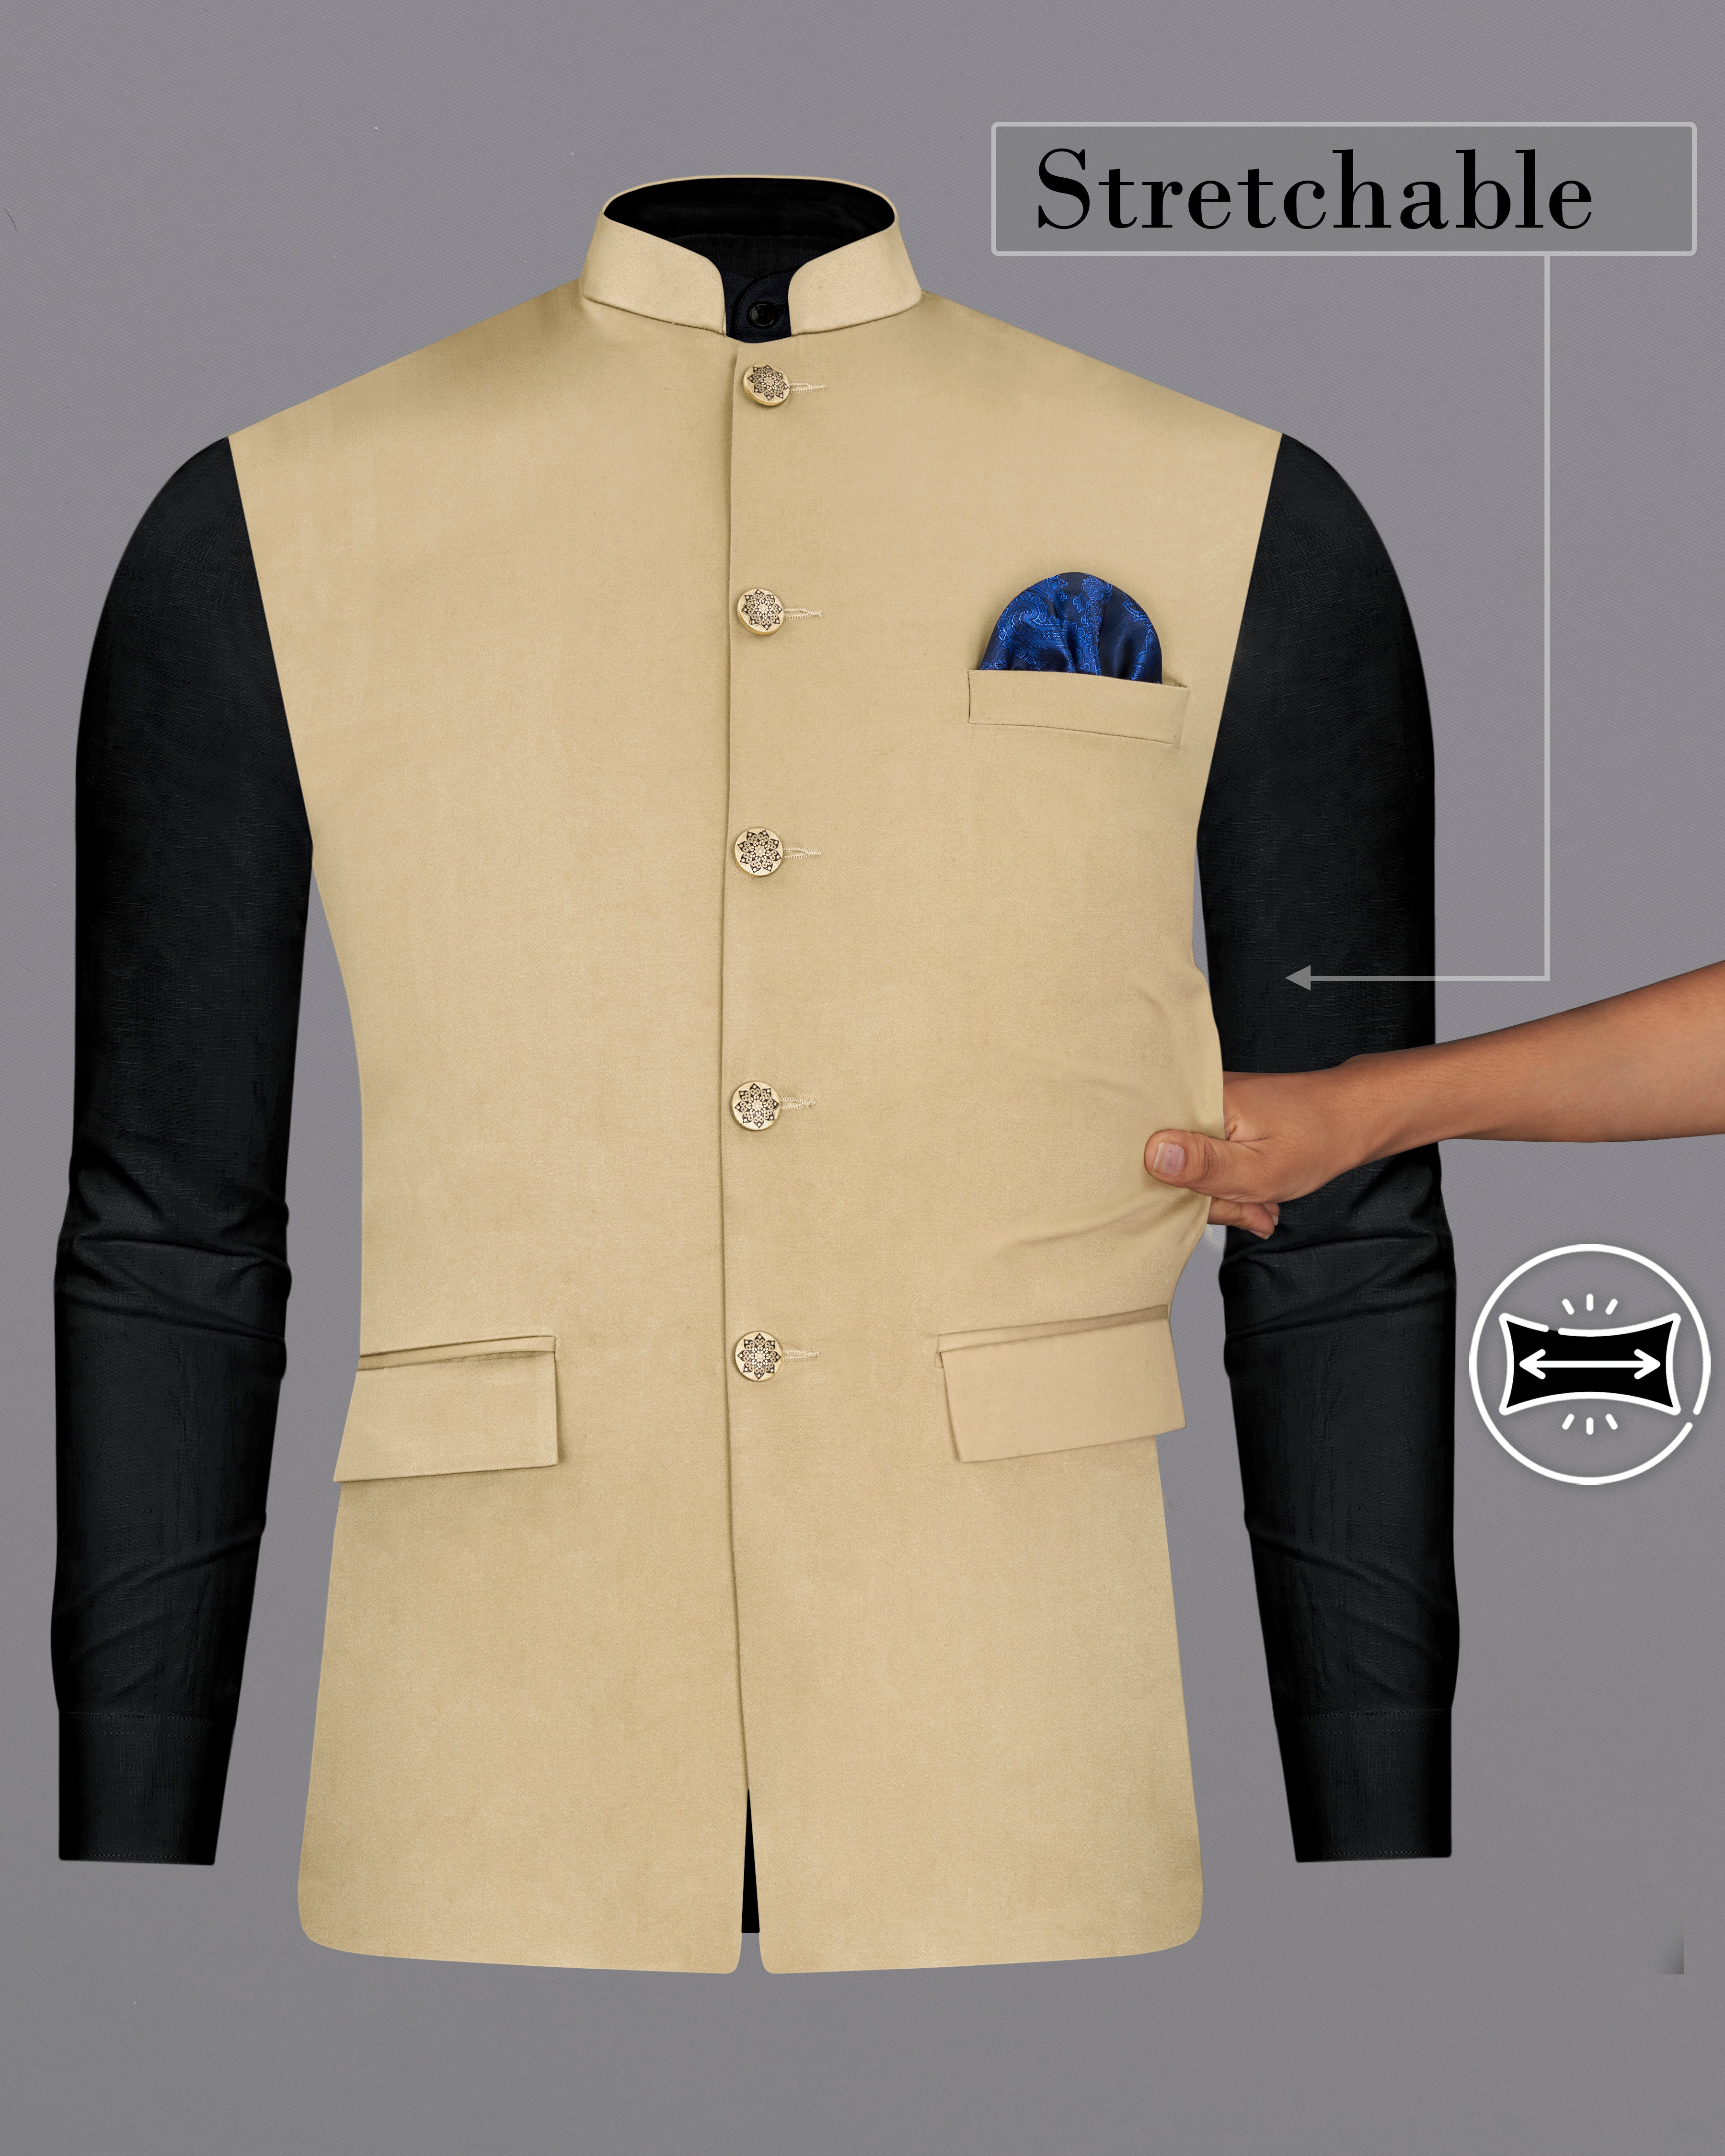 Solid Color Cotton Nehru Jacket in Red : MLC2038